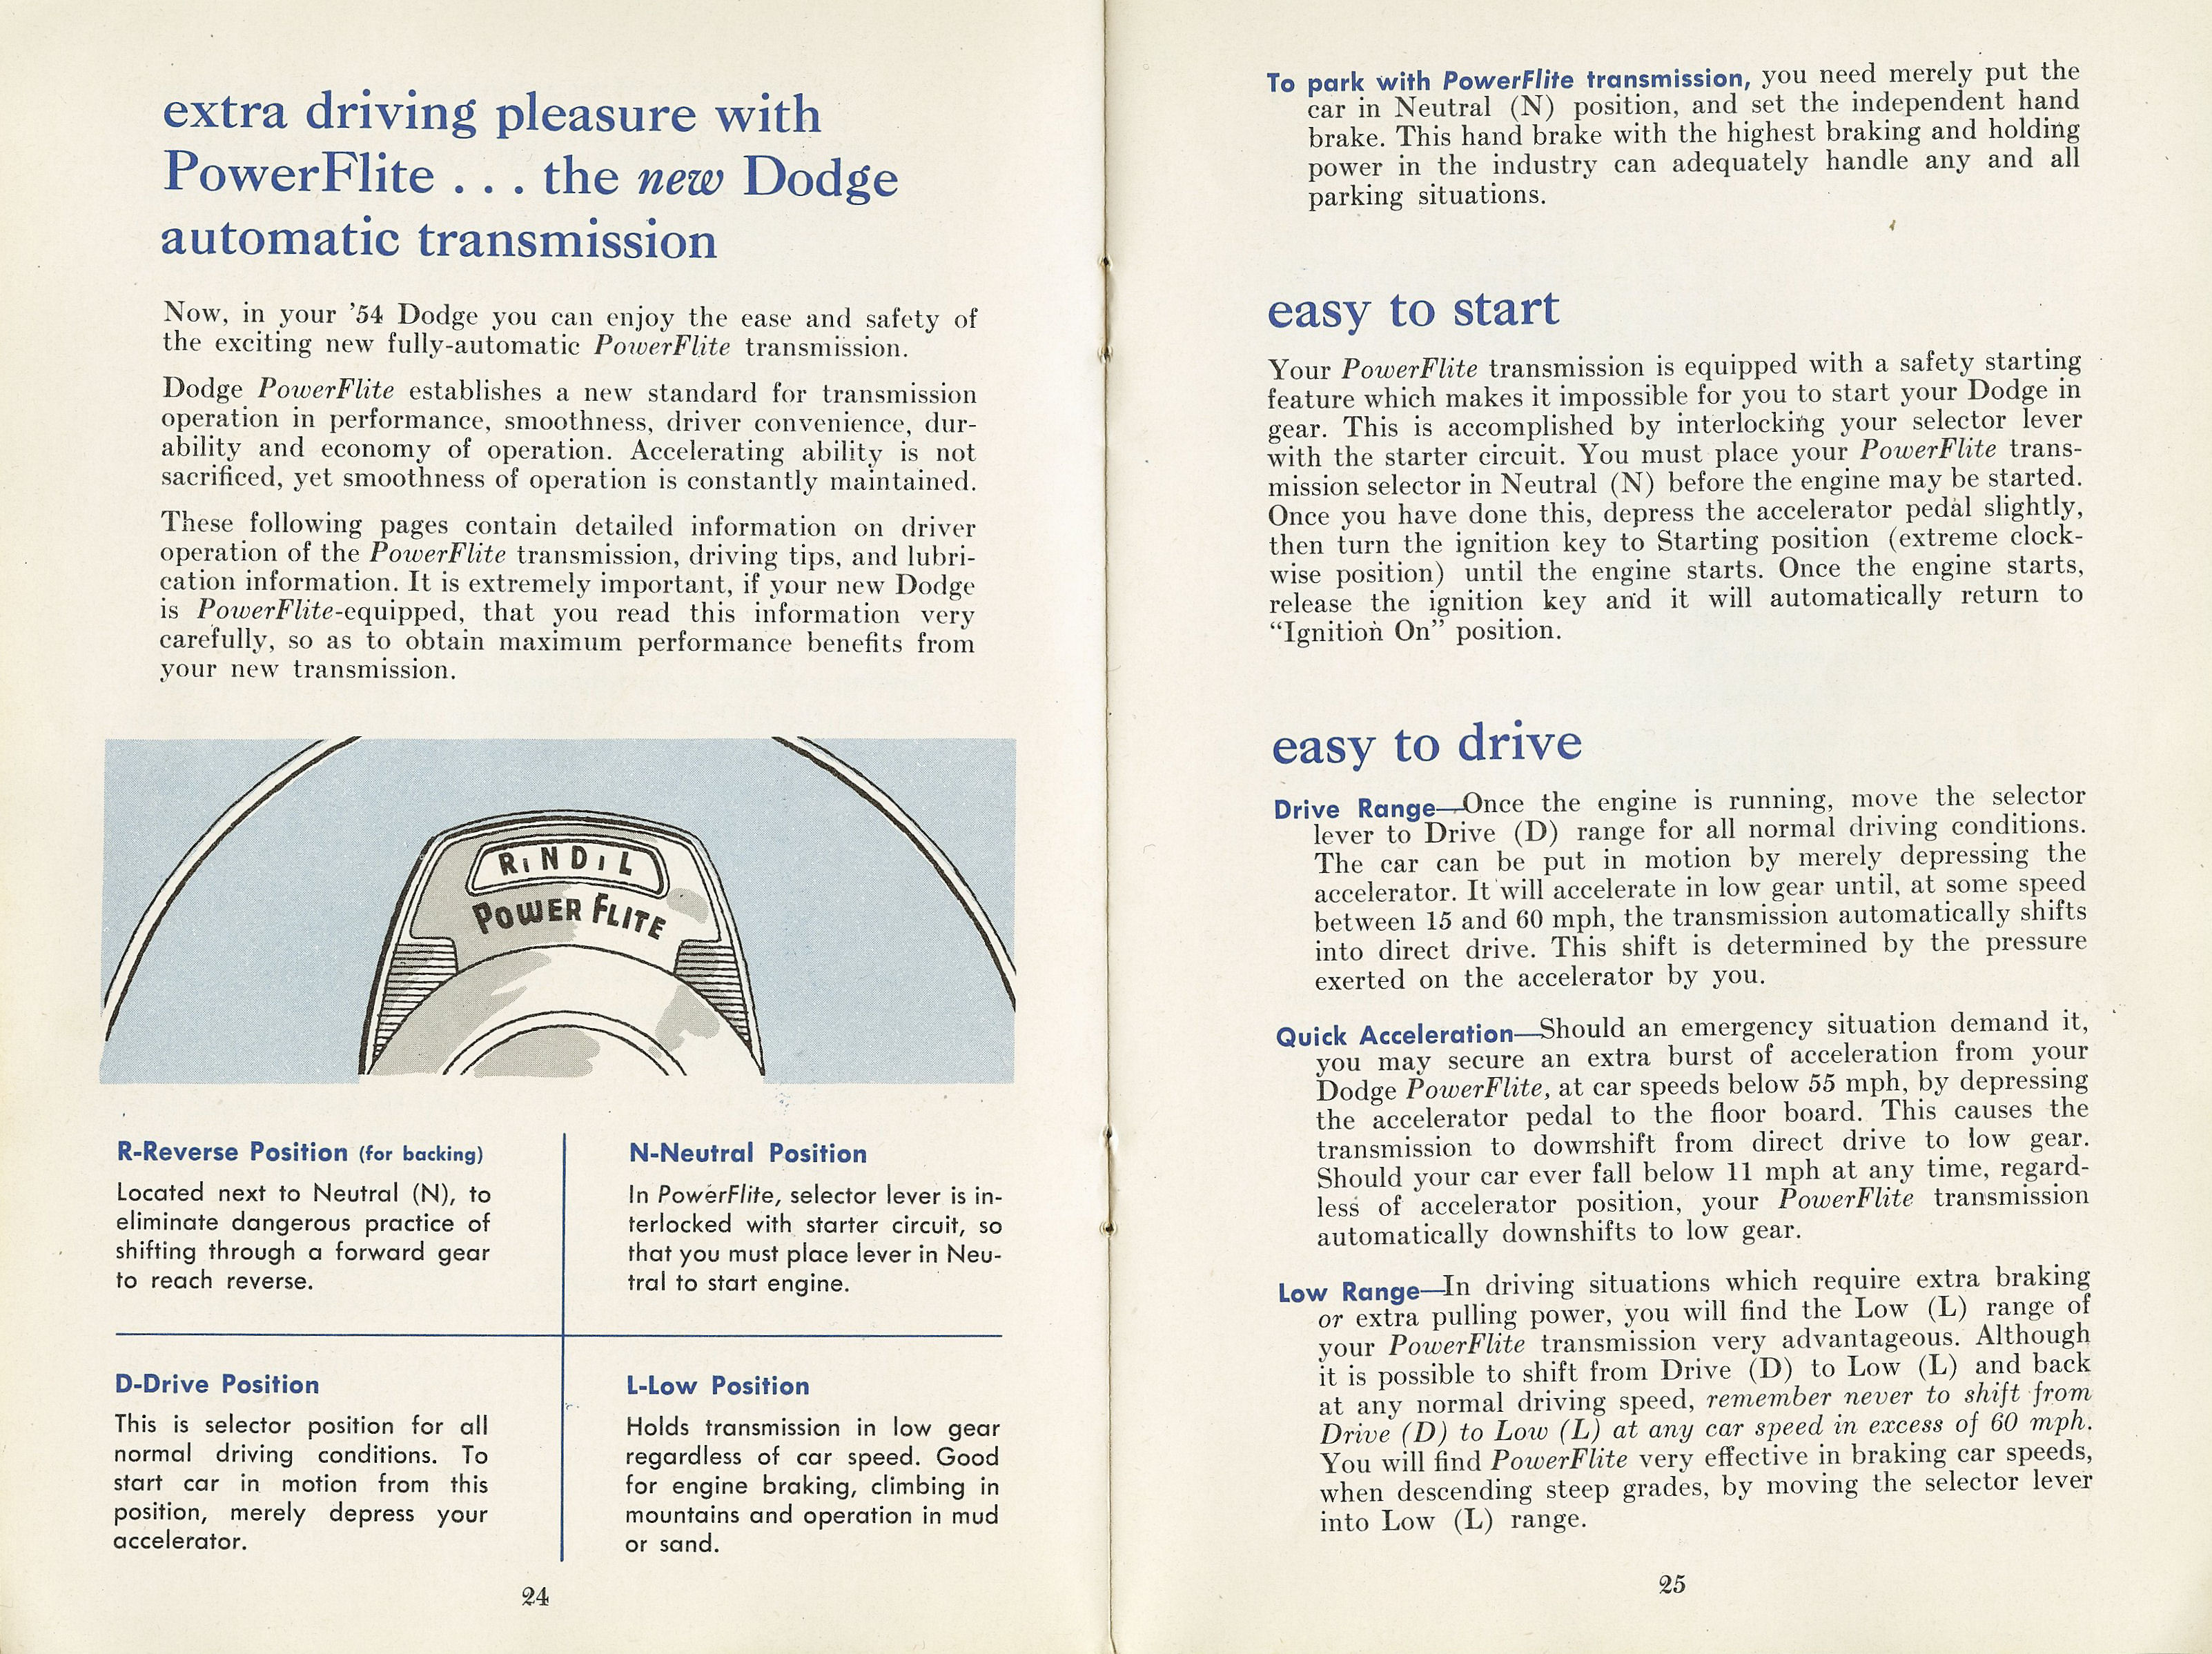 1954 Dodge Car Owners Manual Page 3